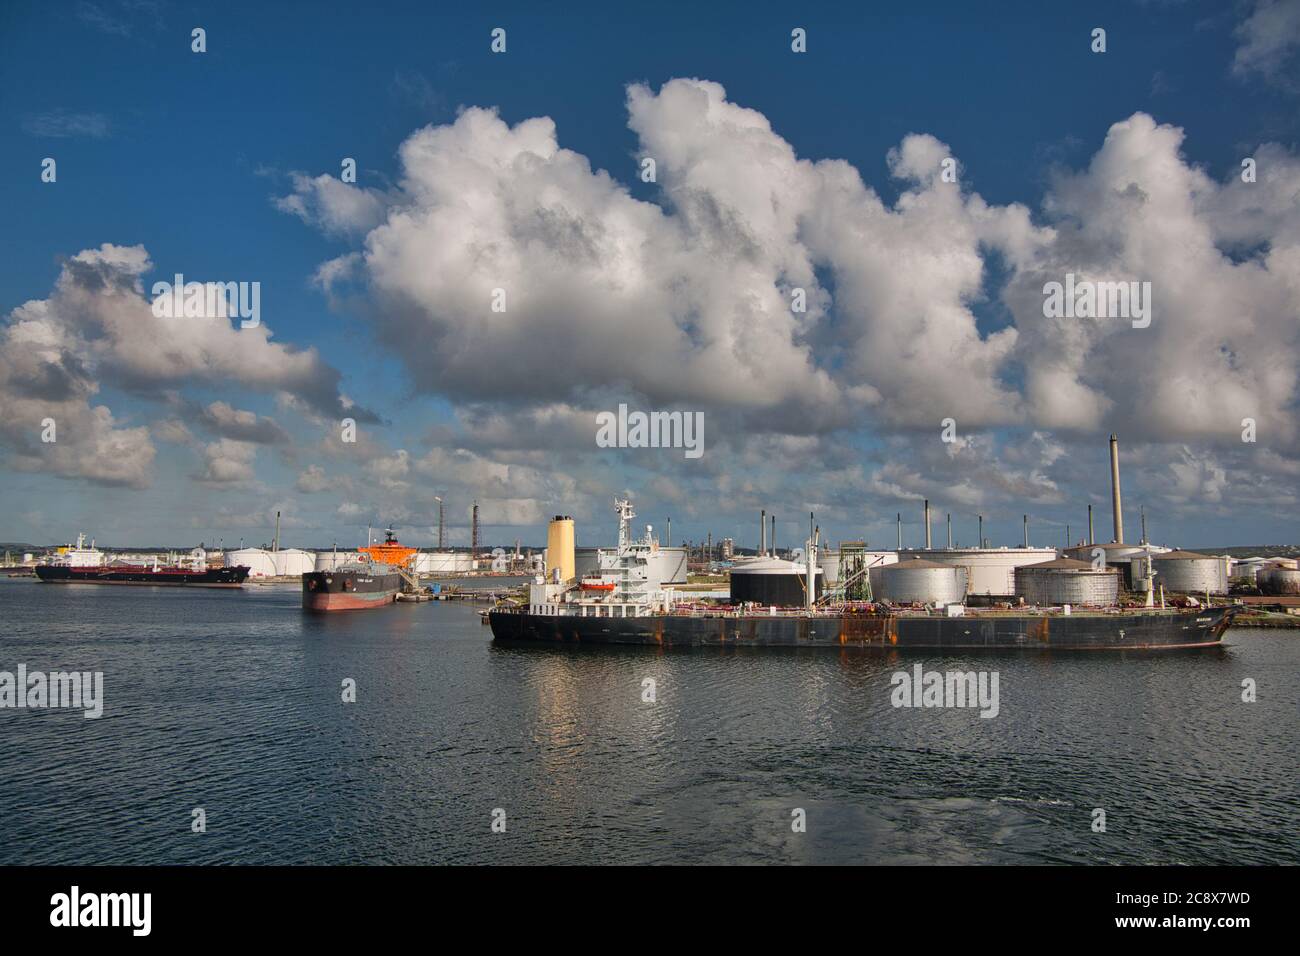 Three tankers moored at an oil refinery on the outskirts of Willemstad, Curacao, The Caribbean Stock Photo